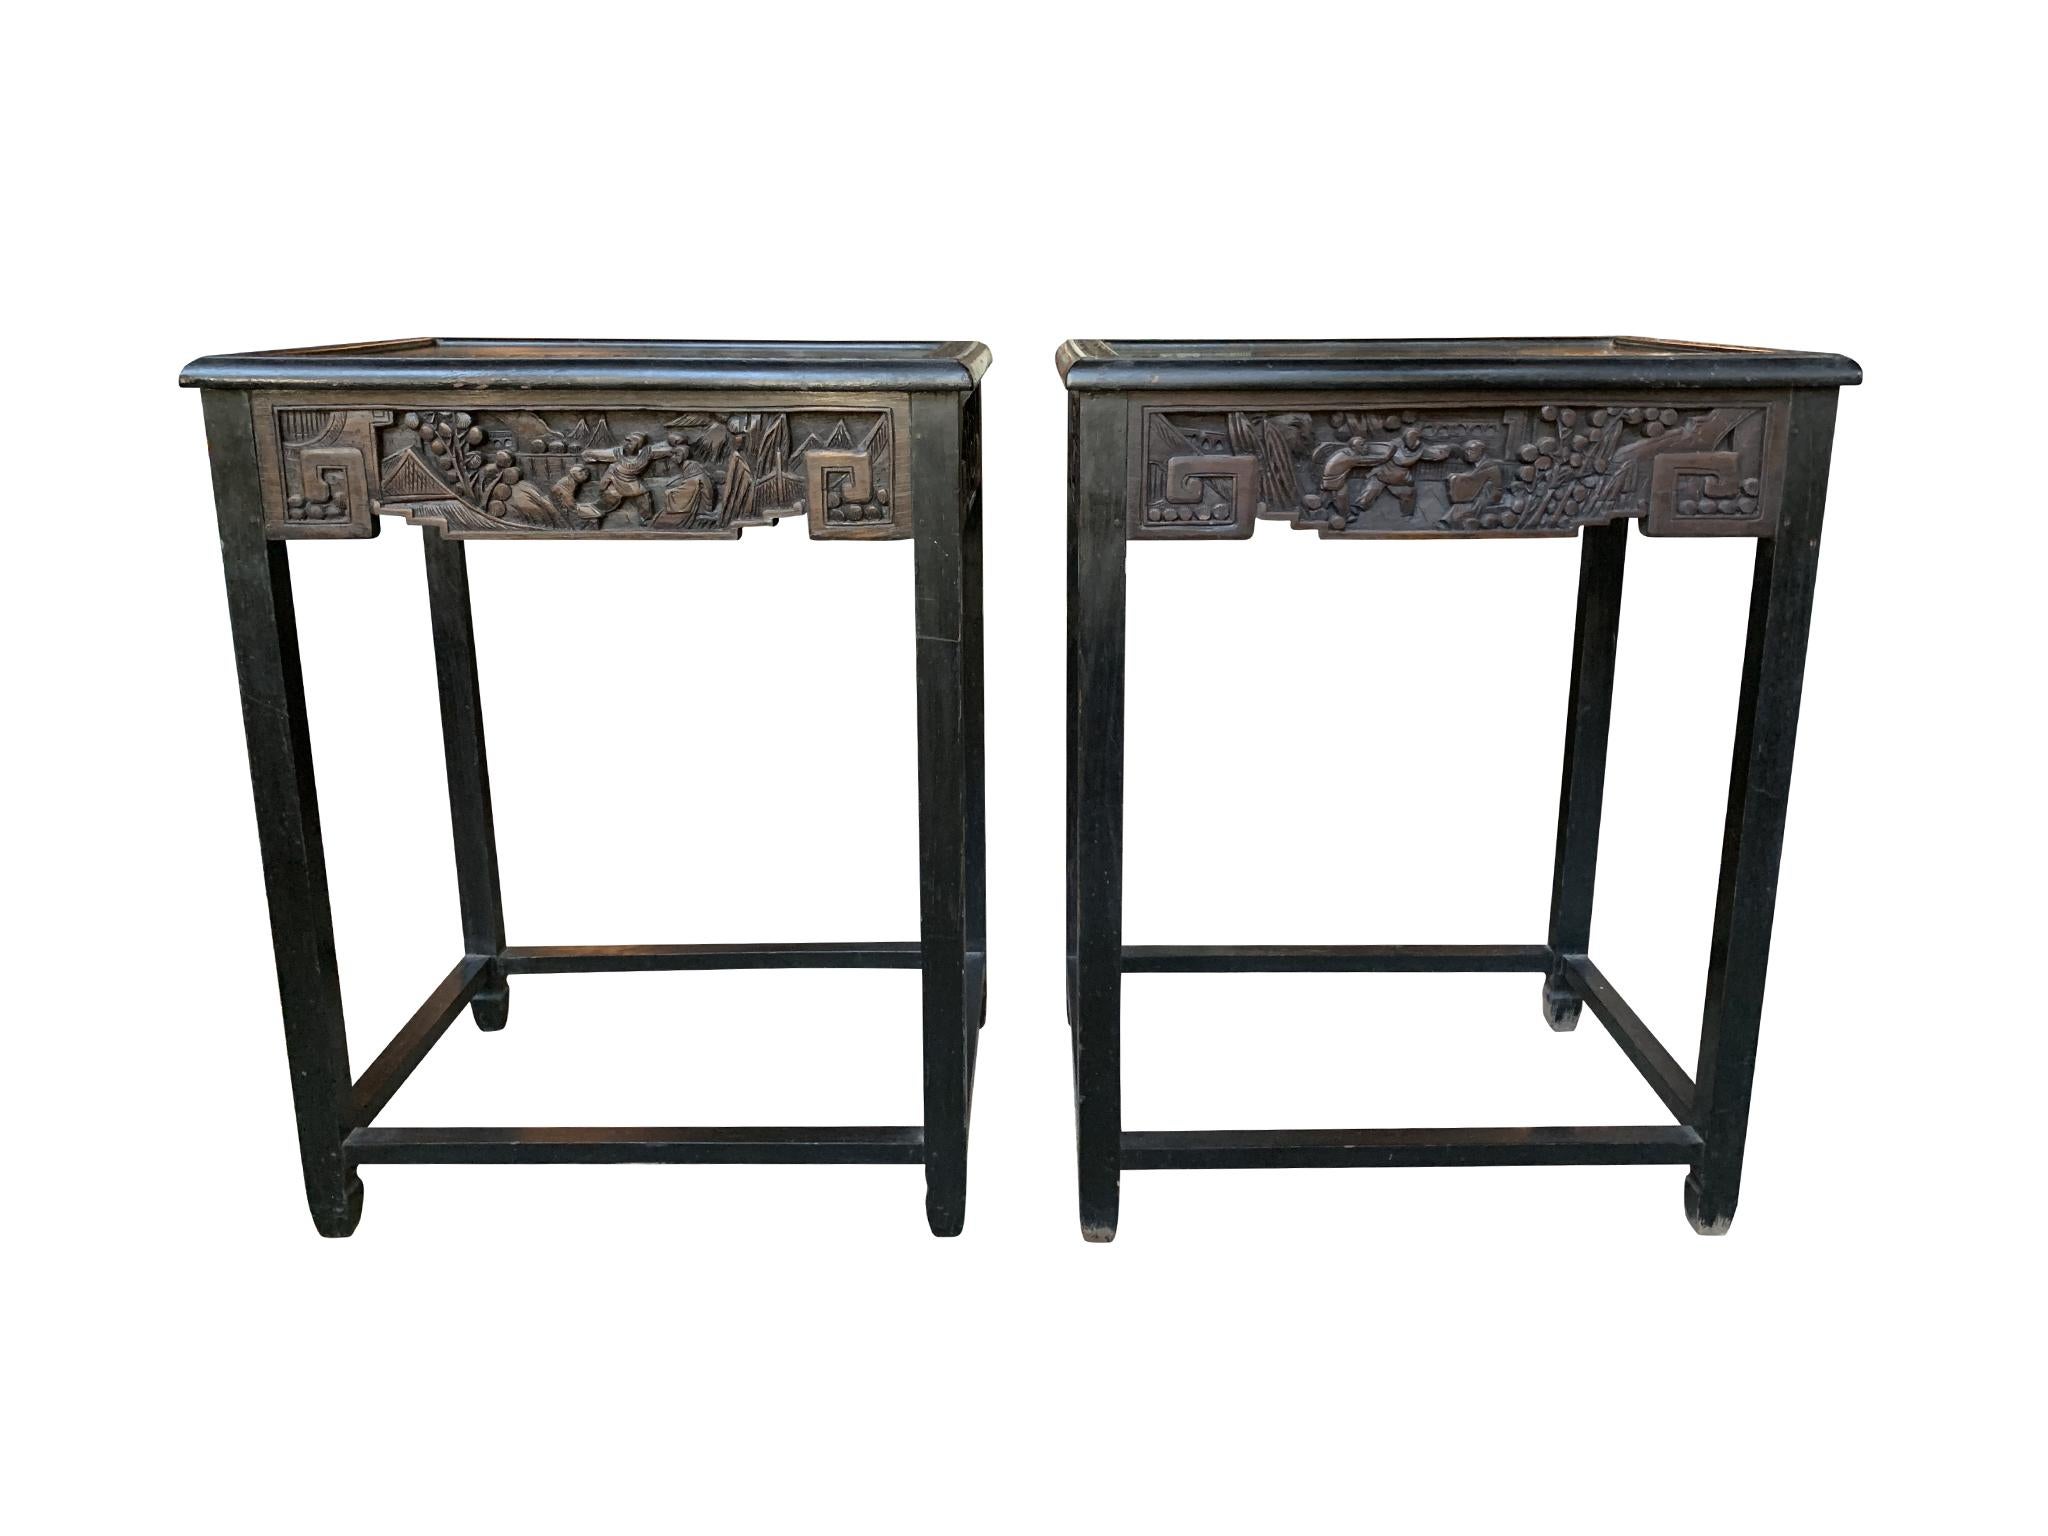 A pair of 1940s Chinese side tables, crafted with ebonized wood. The tables are remarkable for the hand carved, ornate frieze that runs along the skirt. A border of hand carved flowers frames the tabletop. The wood has a warm dark-brown tone. Its